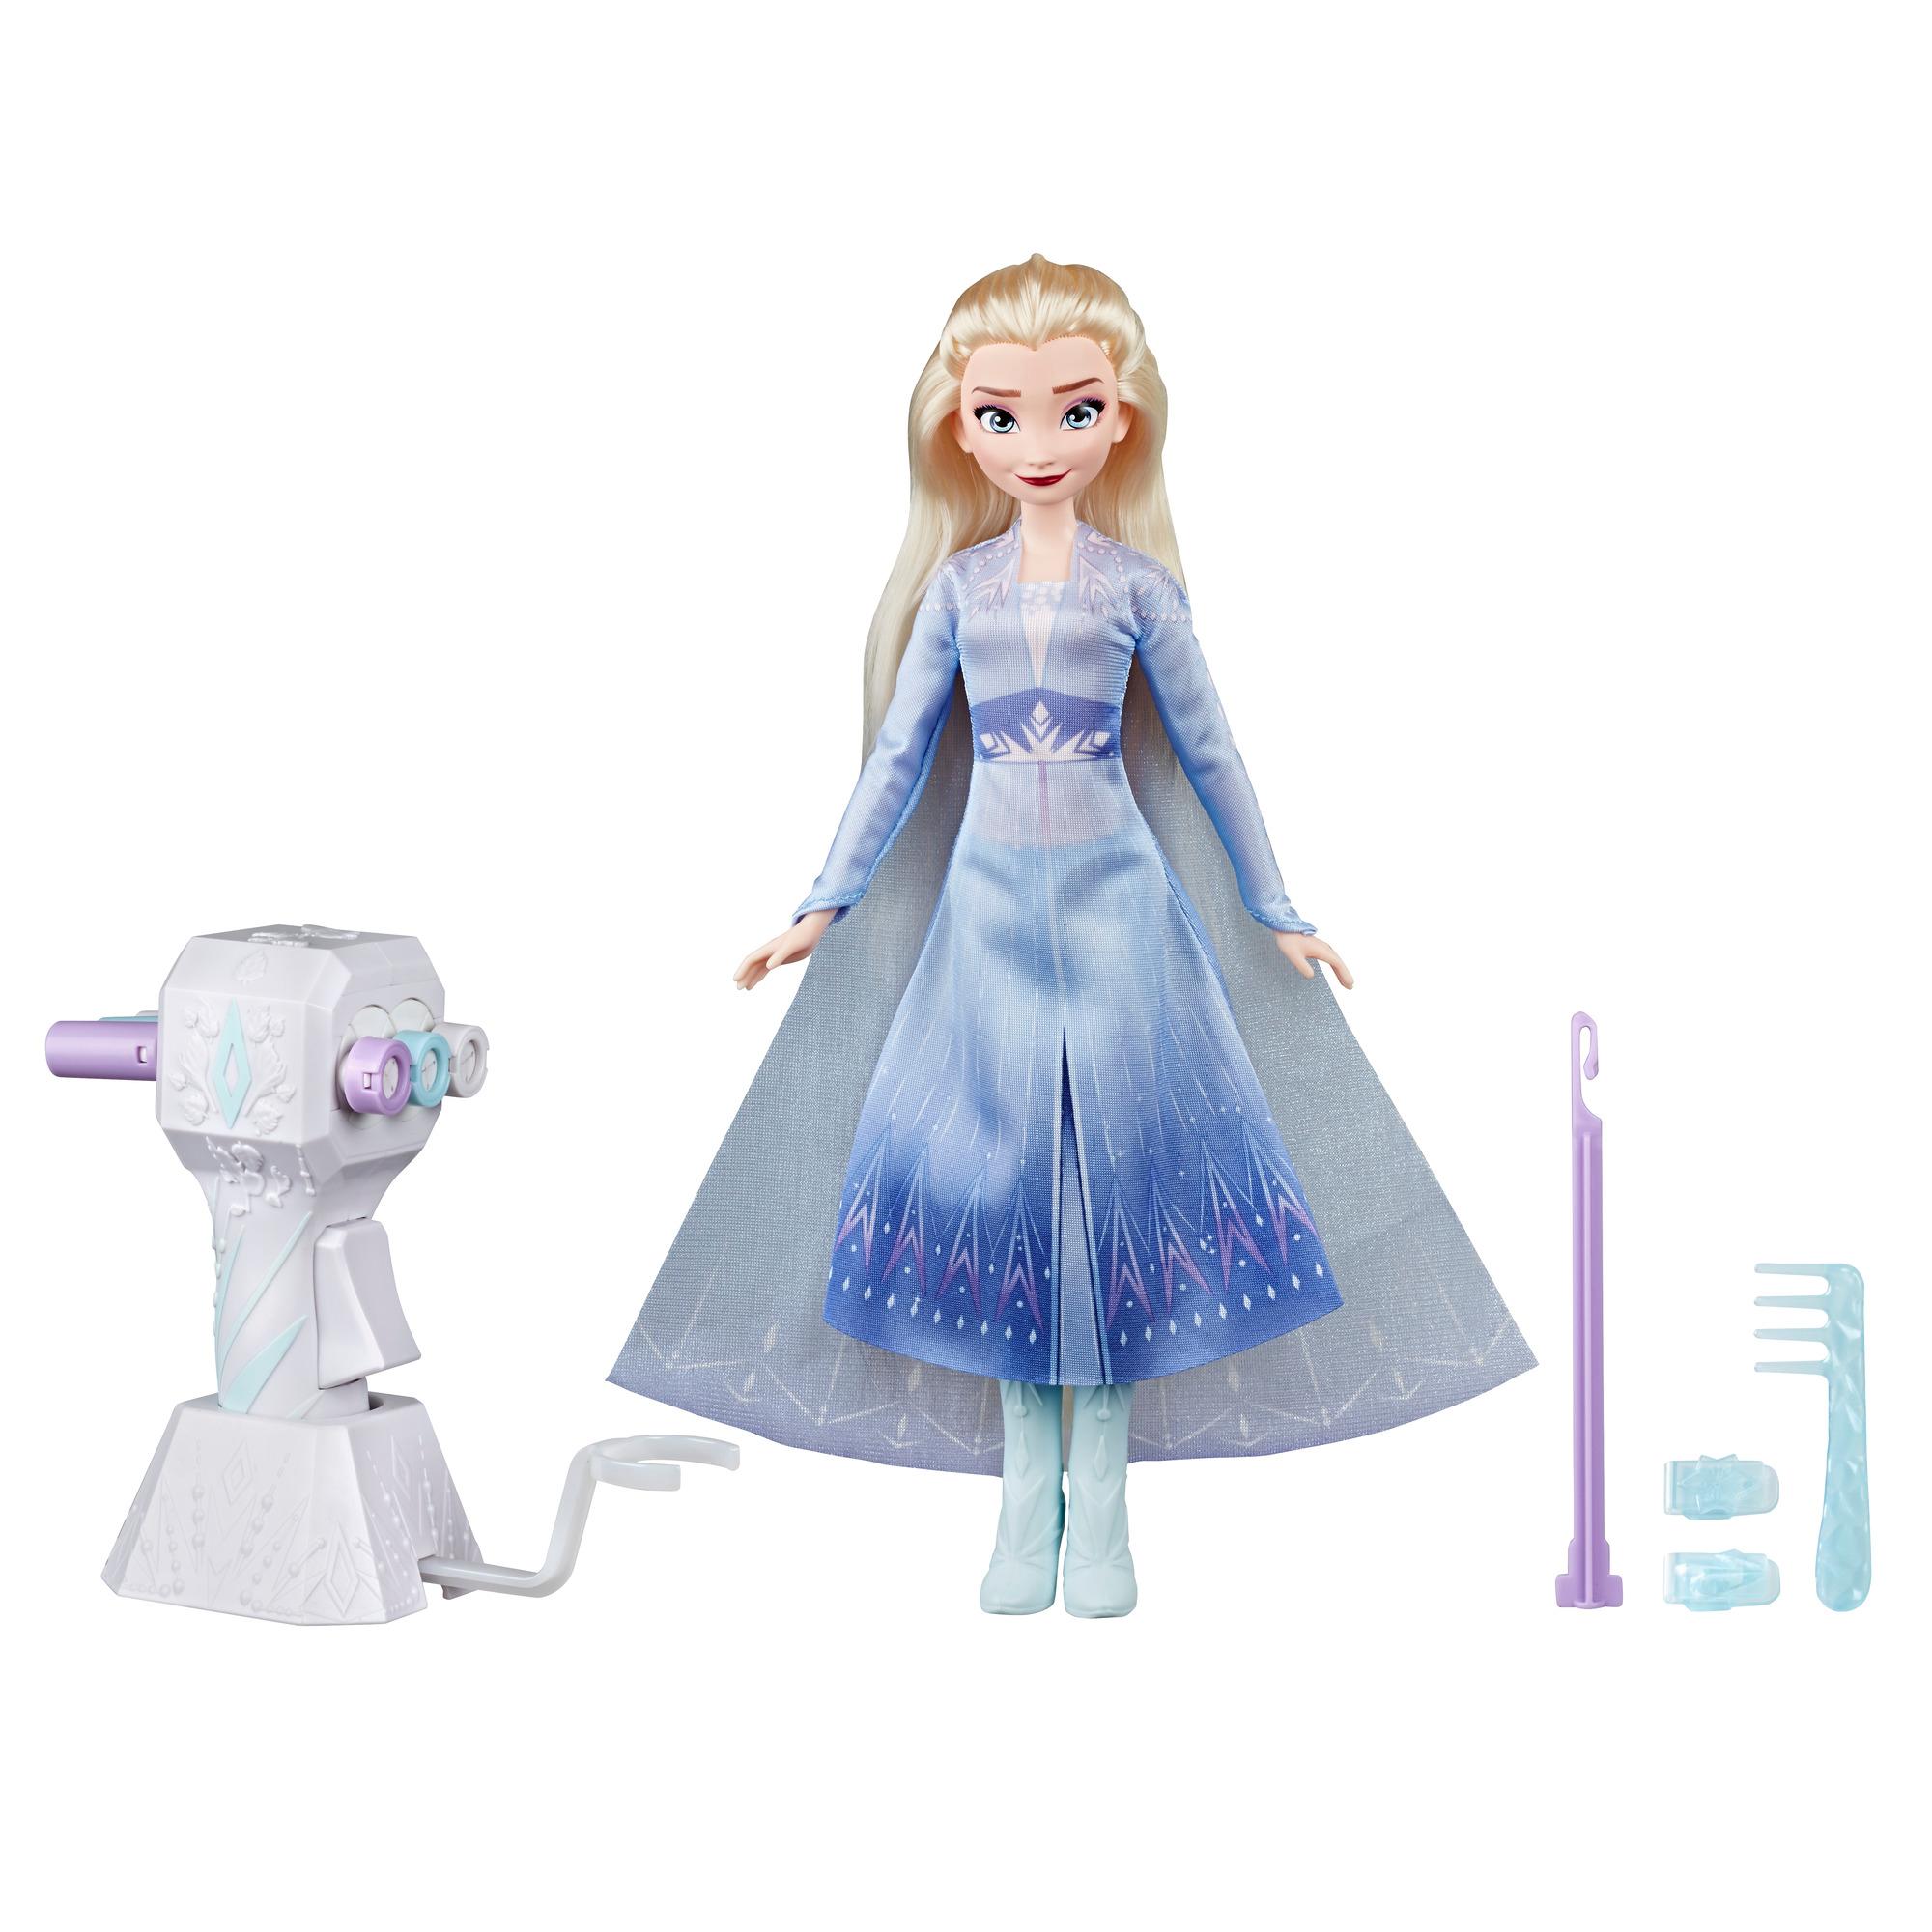 Disney Frozen Sister Styles Elsa Fashion Doll With Extra-Long Blonde Hair, Braiding Tool and Hair Clips - Toy For Kids Ages 5 and Up